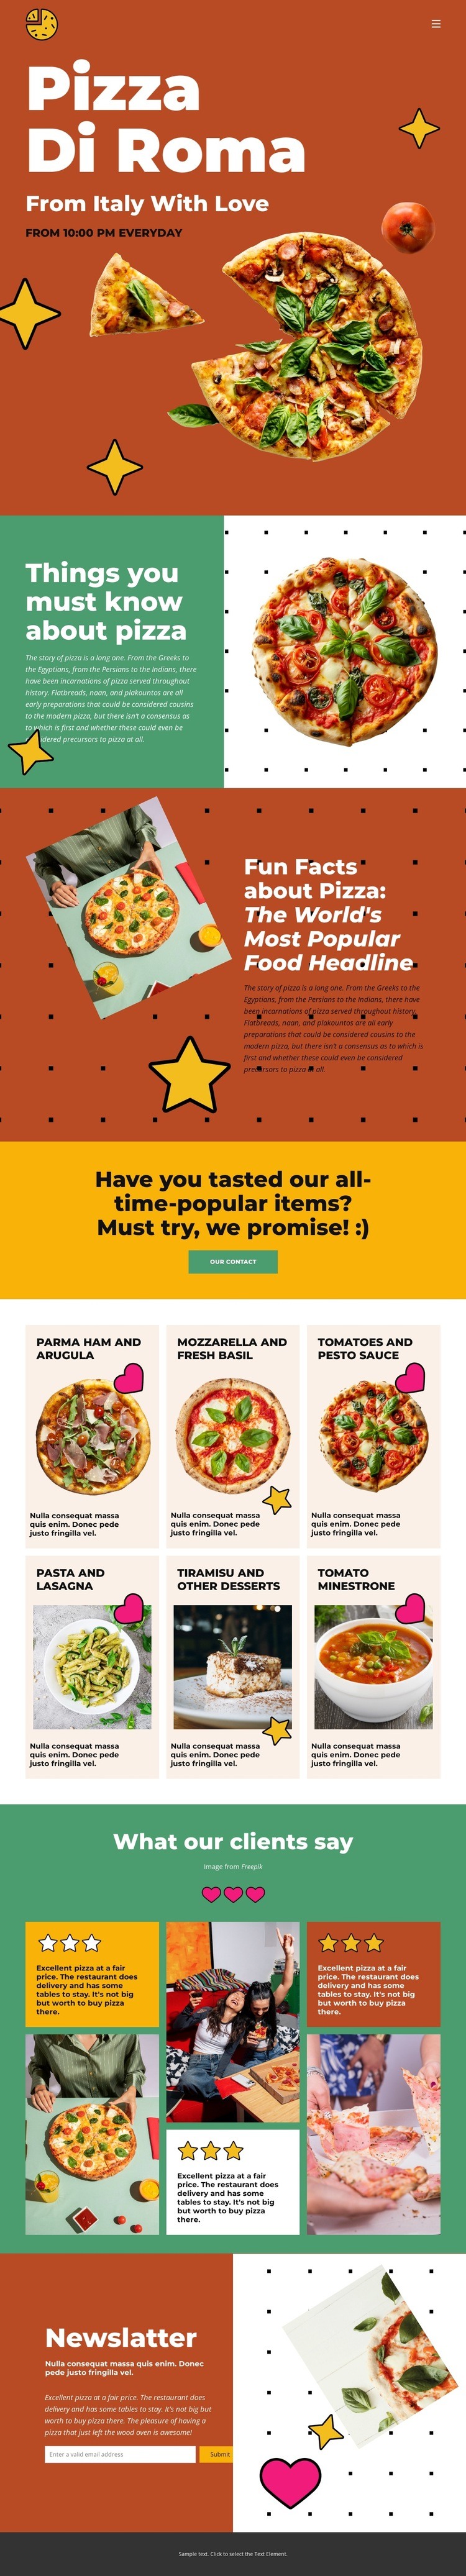 Things you must know about pizza Homepage Design